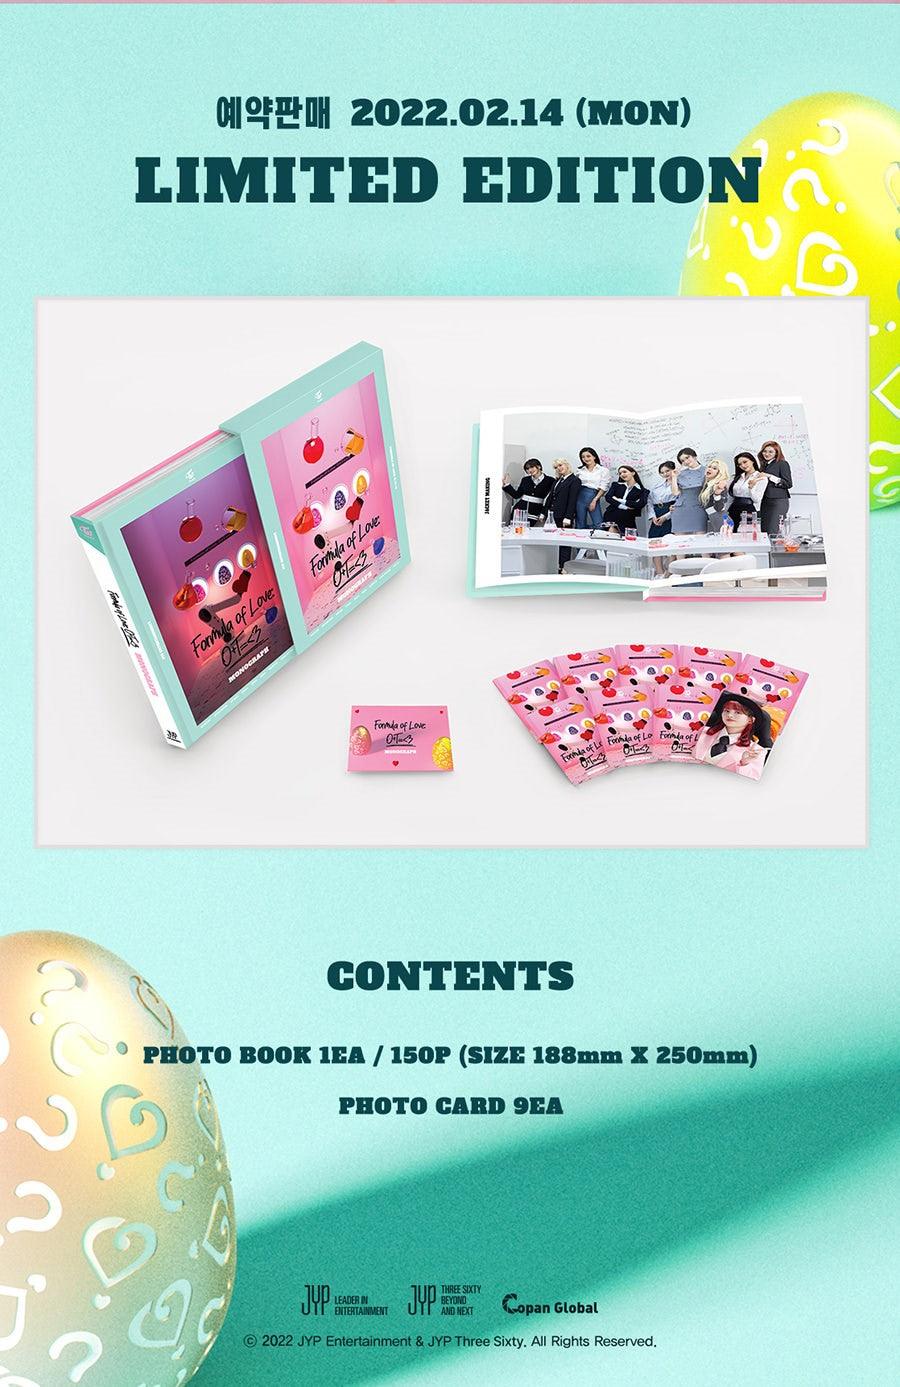 TWICE - MONOGRAPH [Formula of Love: O+T=<3] (Limited Edition) - J-Store Online